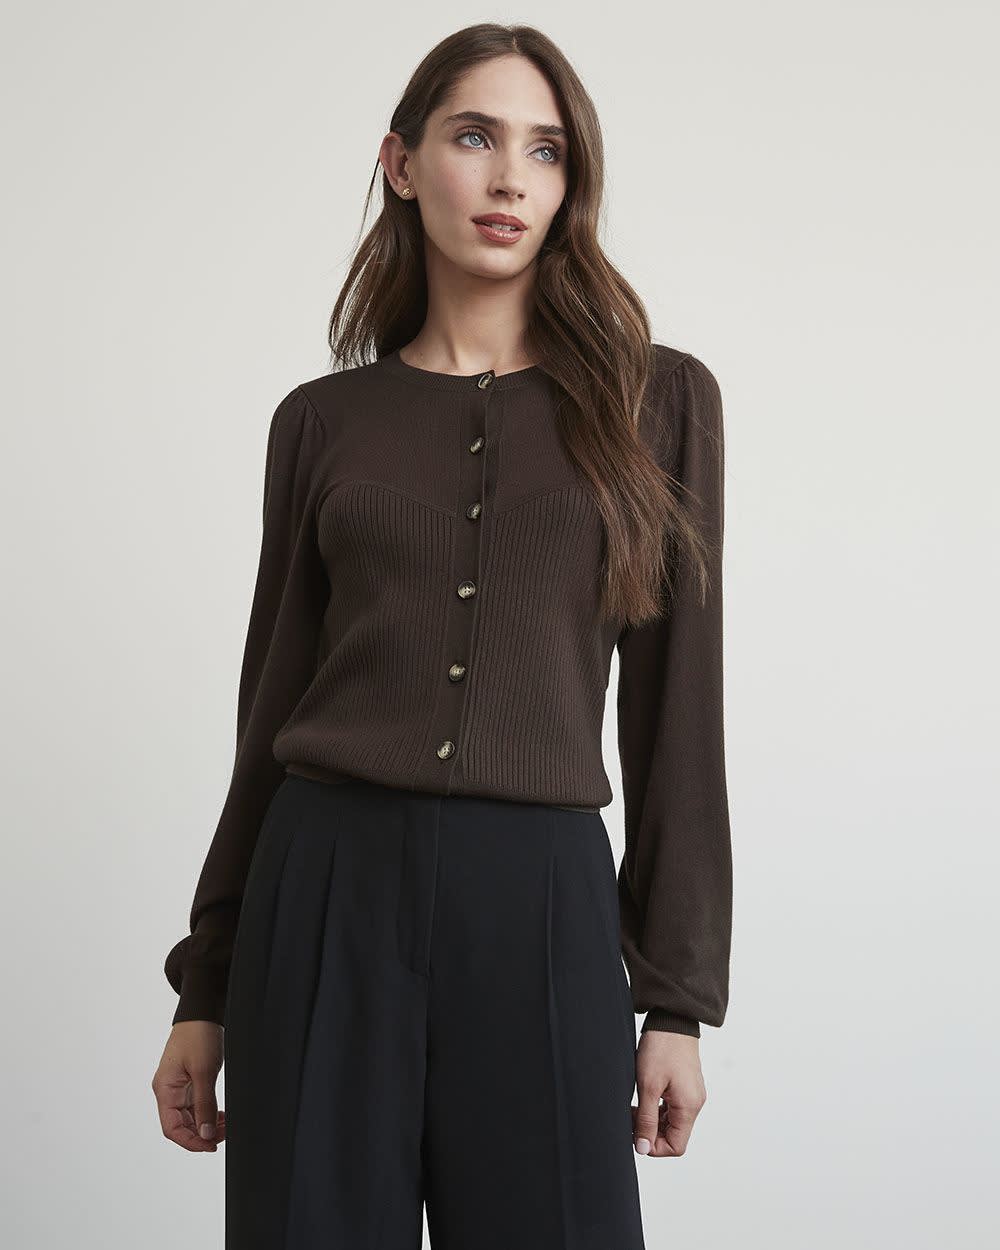 Long-Sleeve Ribbed Cardigan with Bustier Effect | RW&CO.